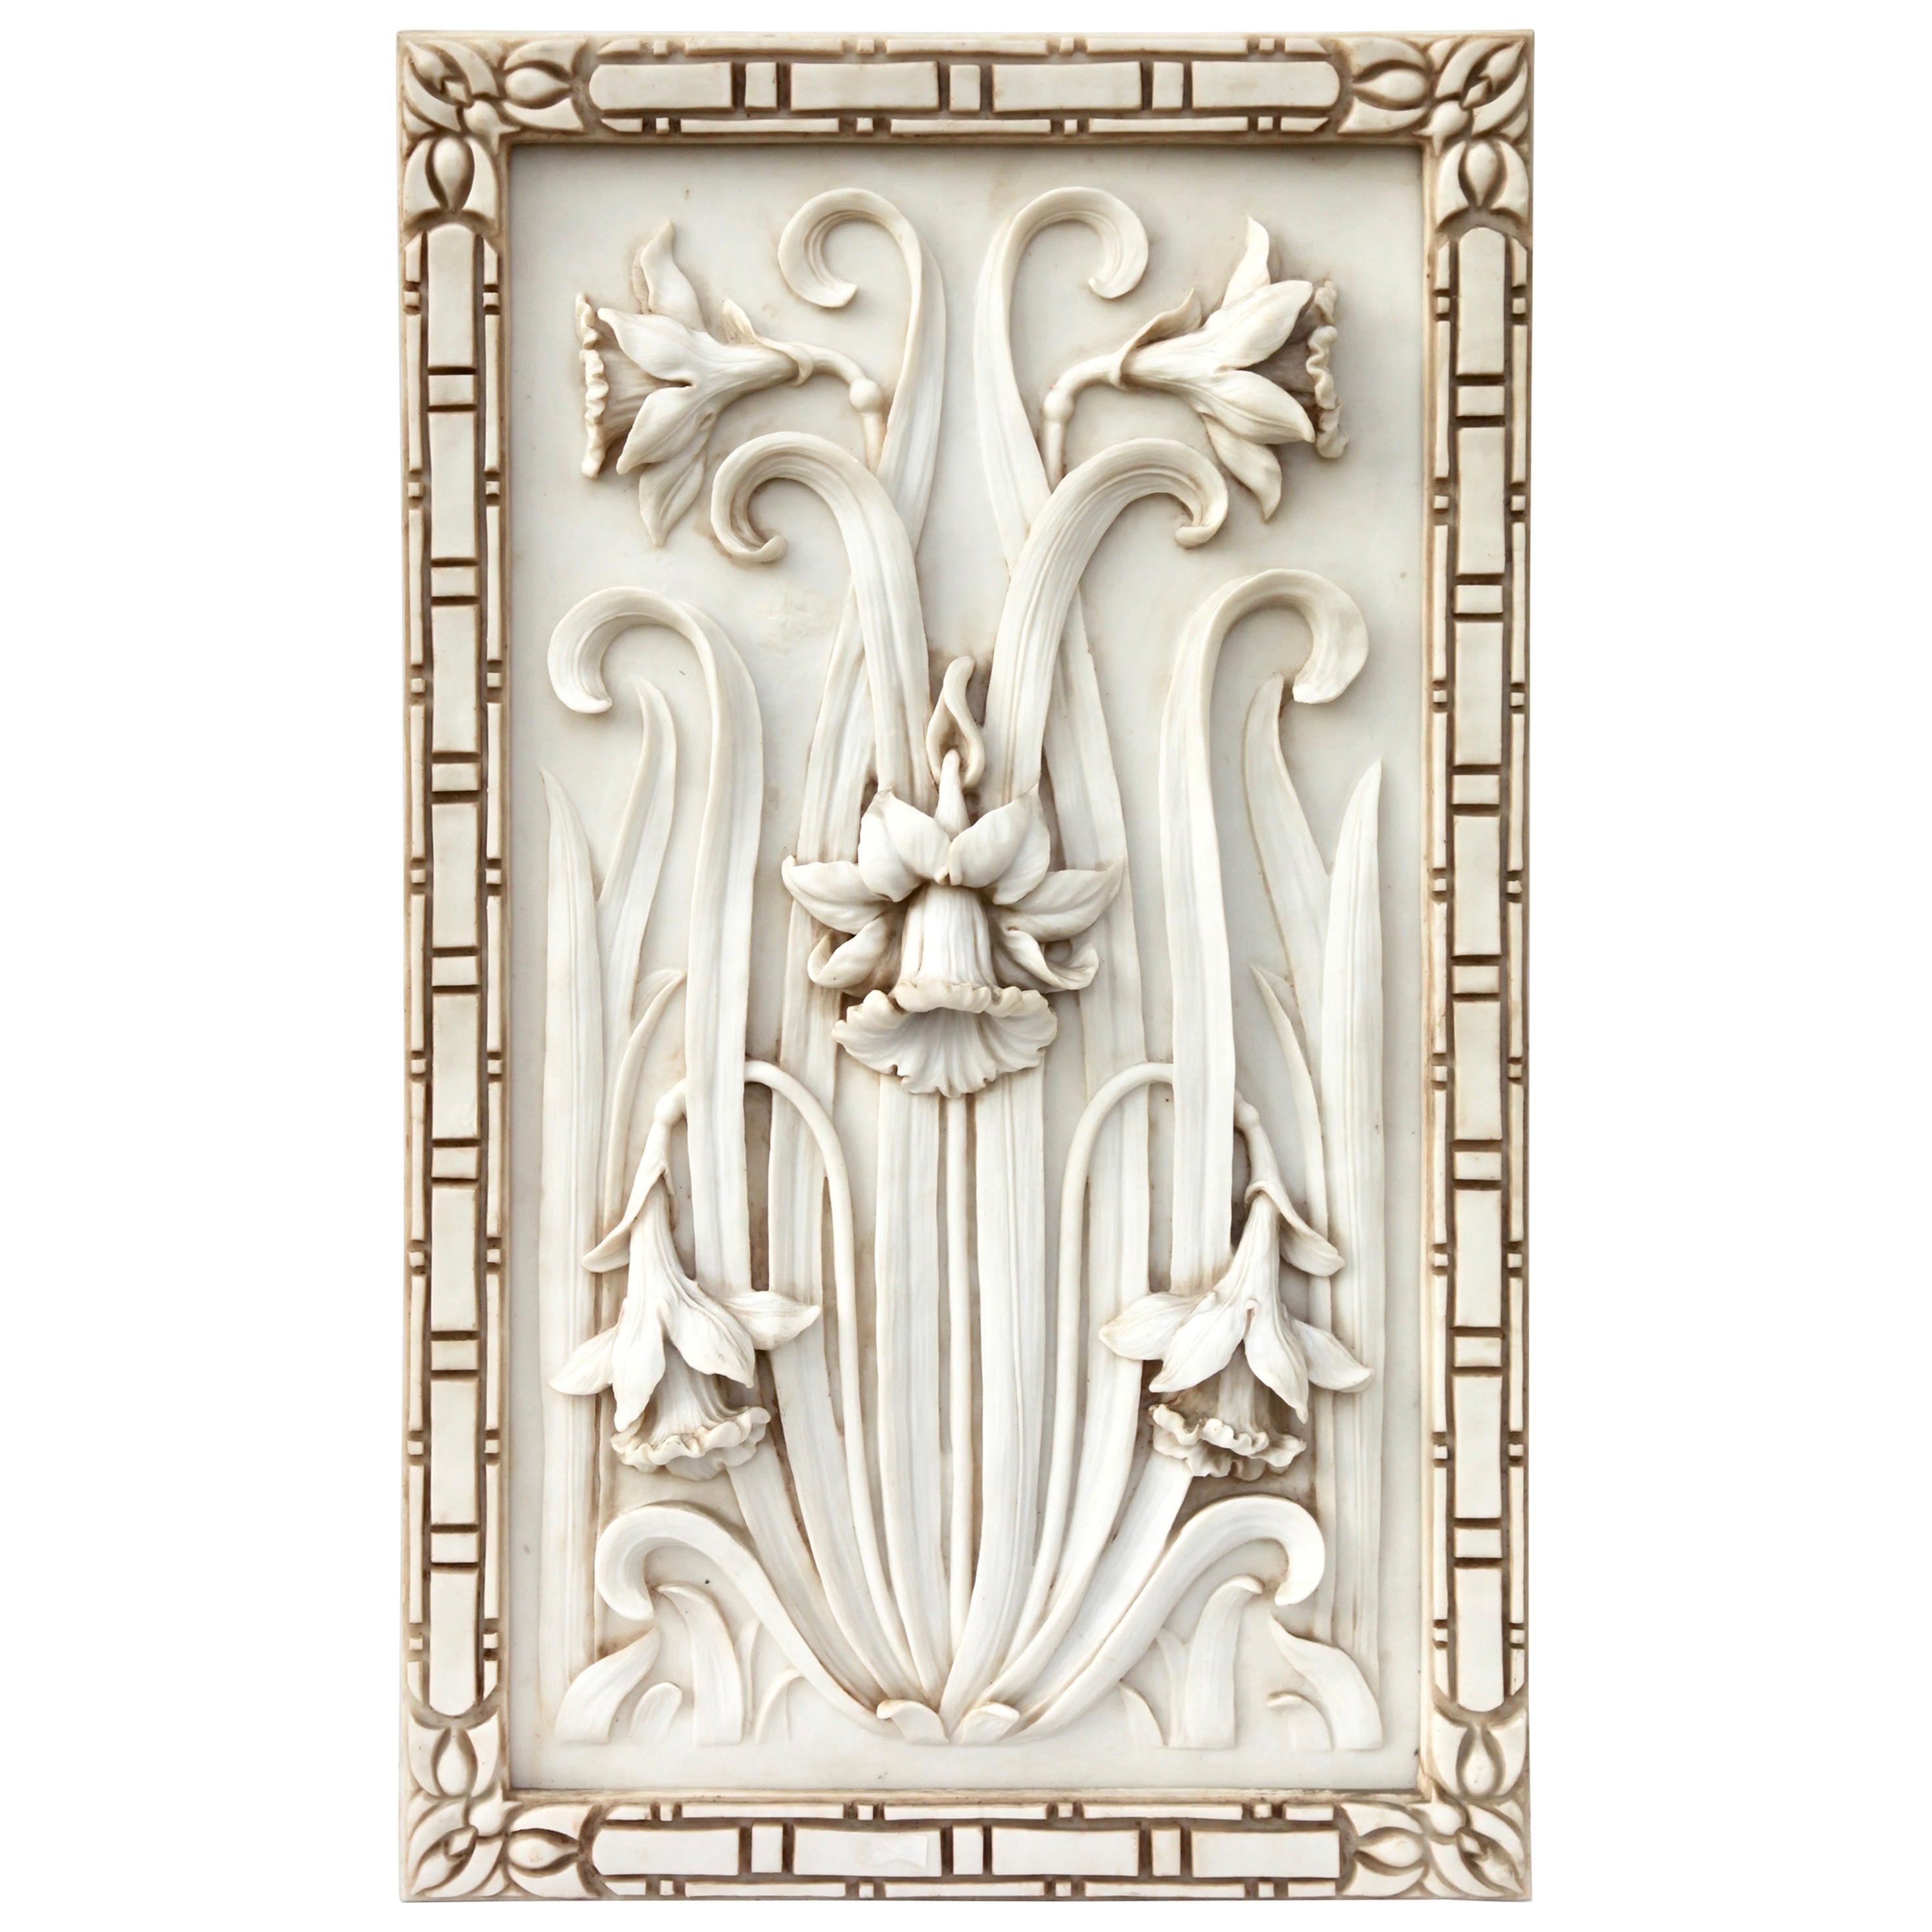 Art Nouveau 3-D Alabaster Sculptural Panel with Foliage and Daffodils / Jonquils For Sale